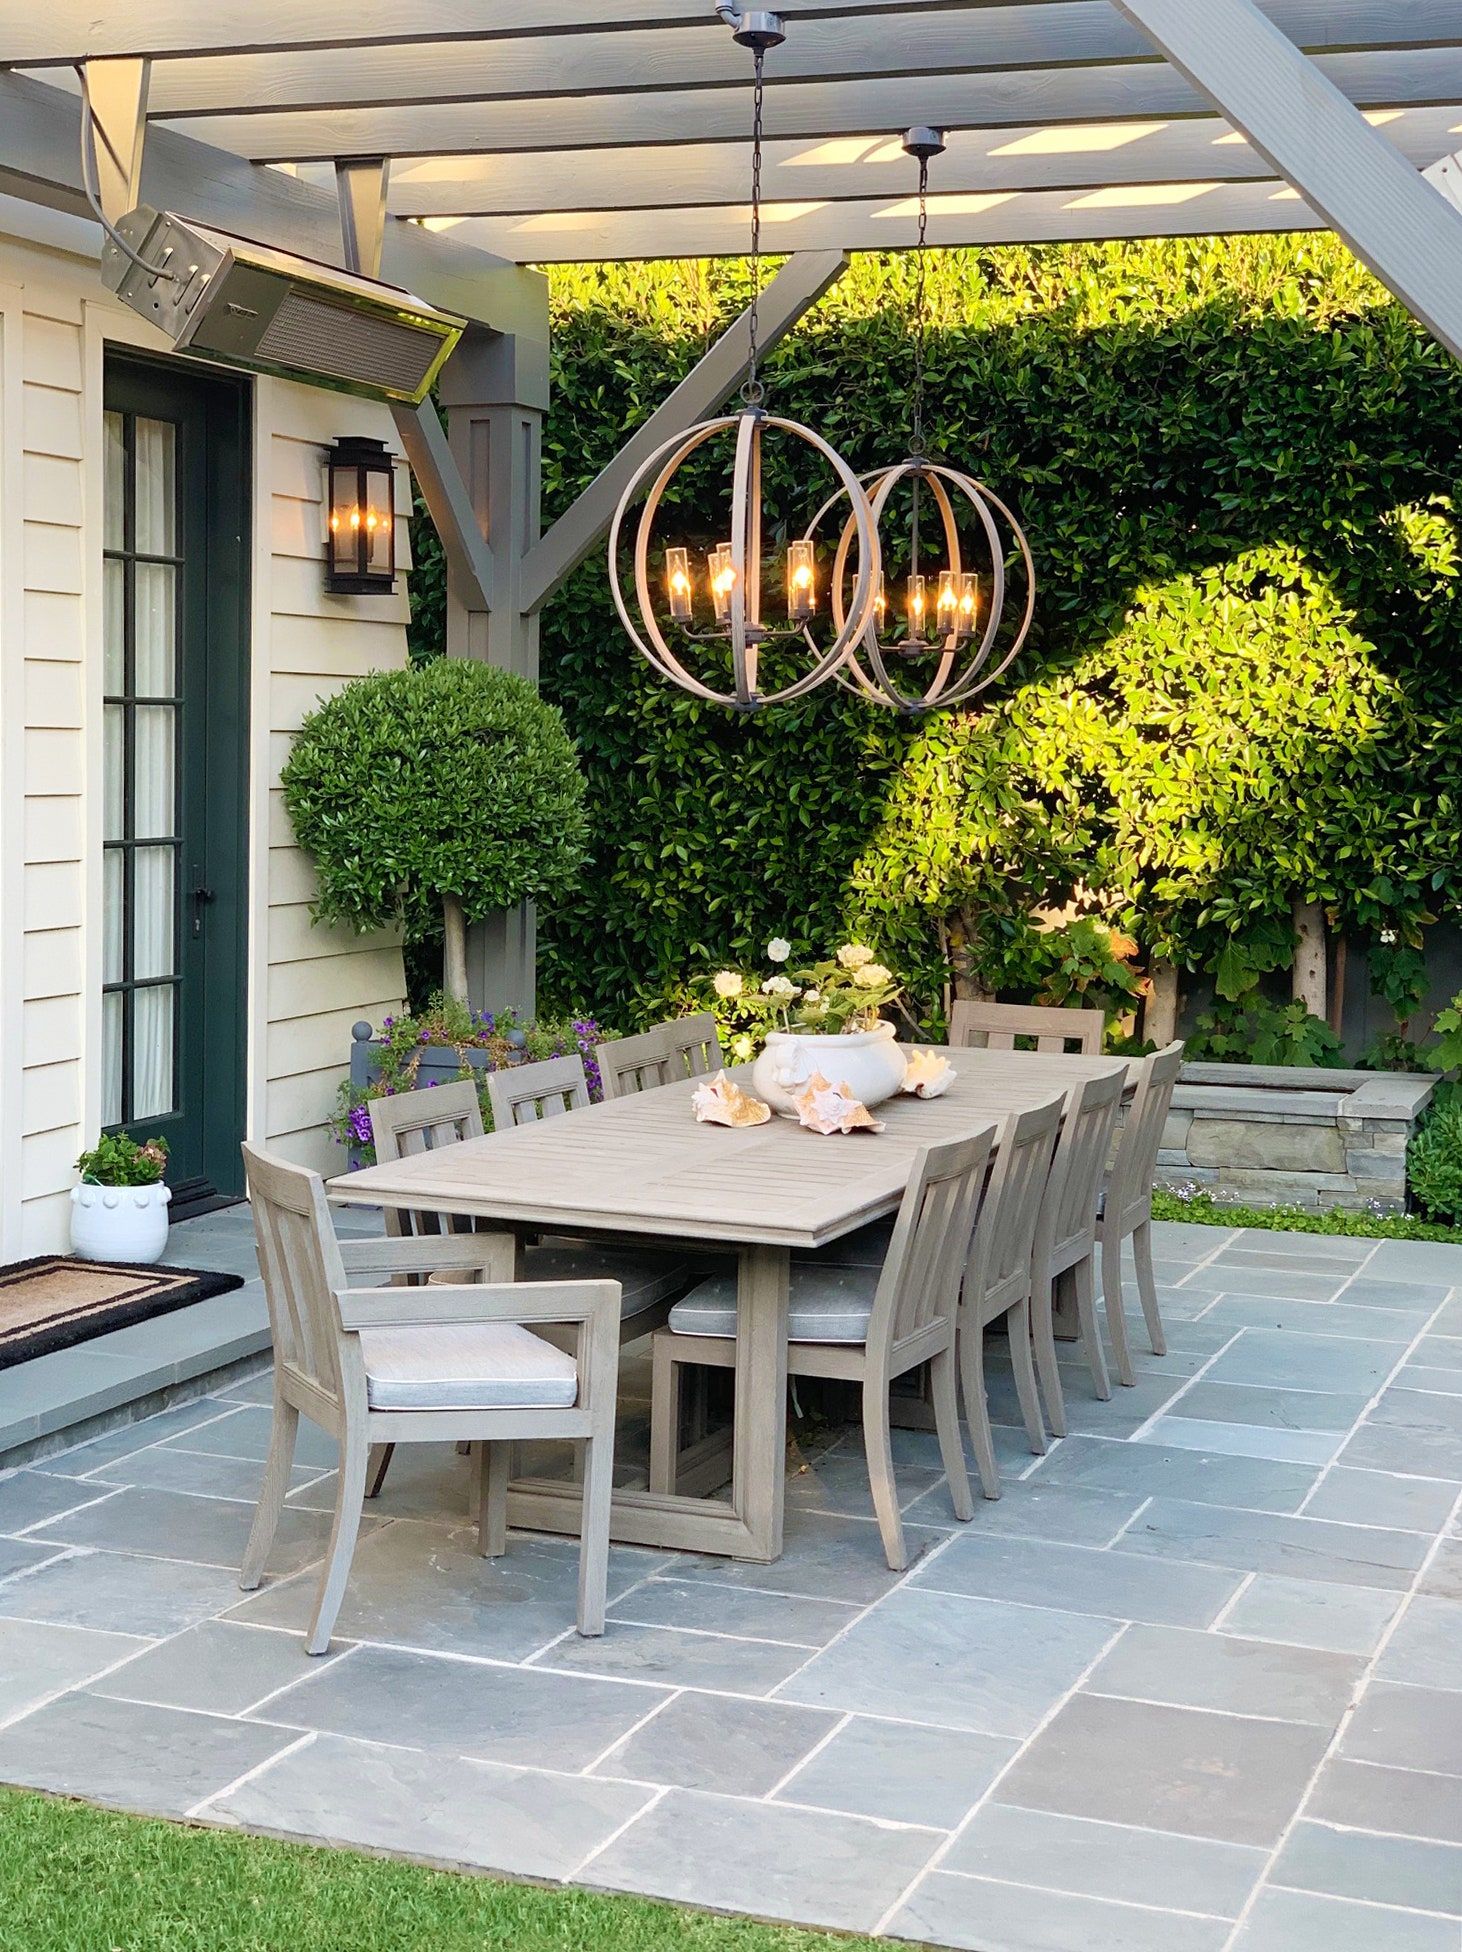 Creative Cement Patio Design Ideas for Your Outdoor Space